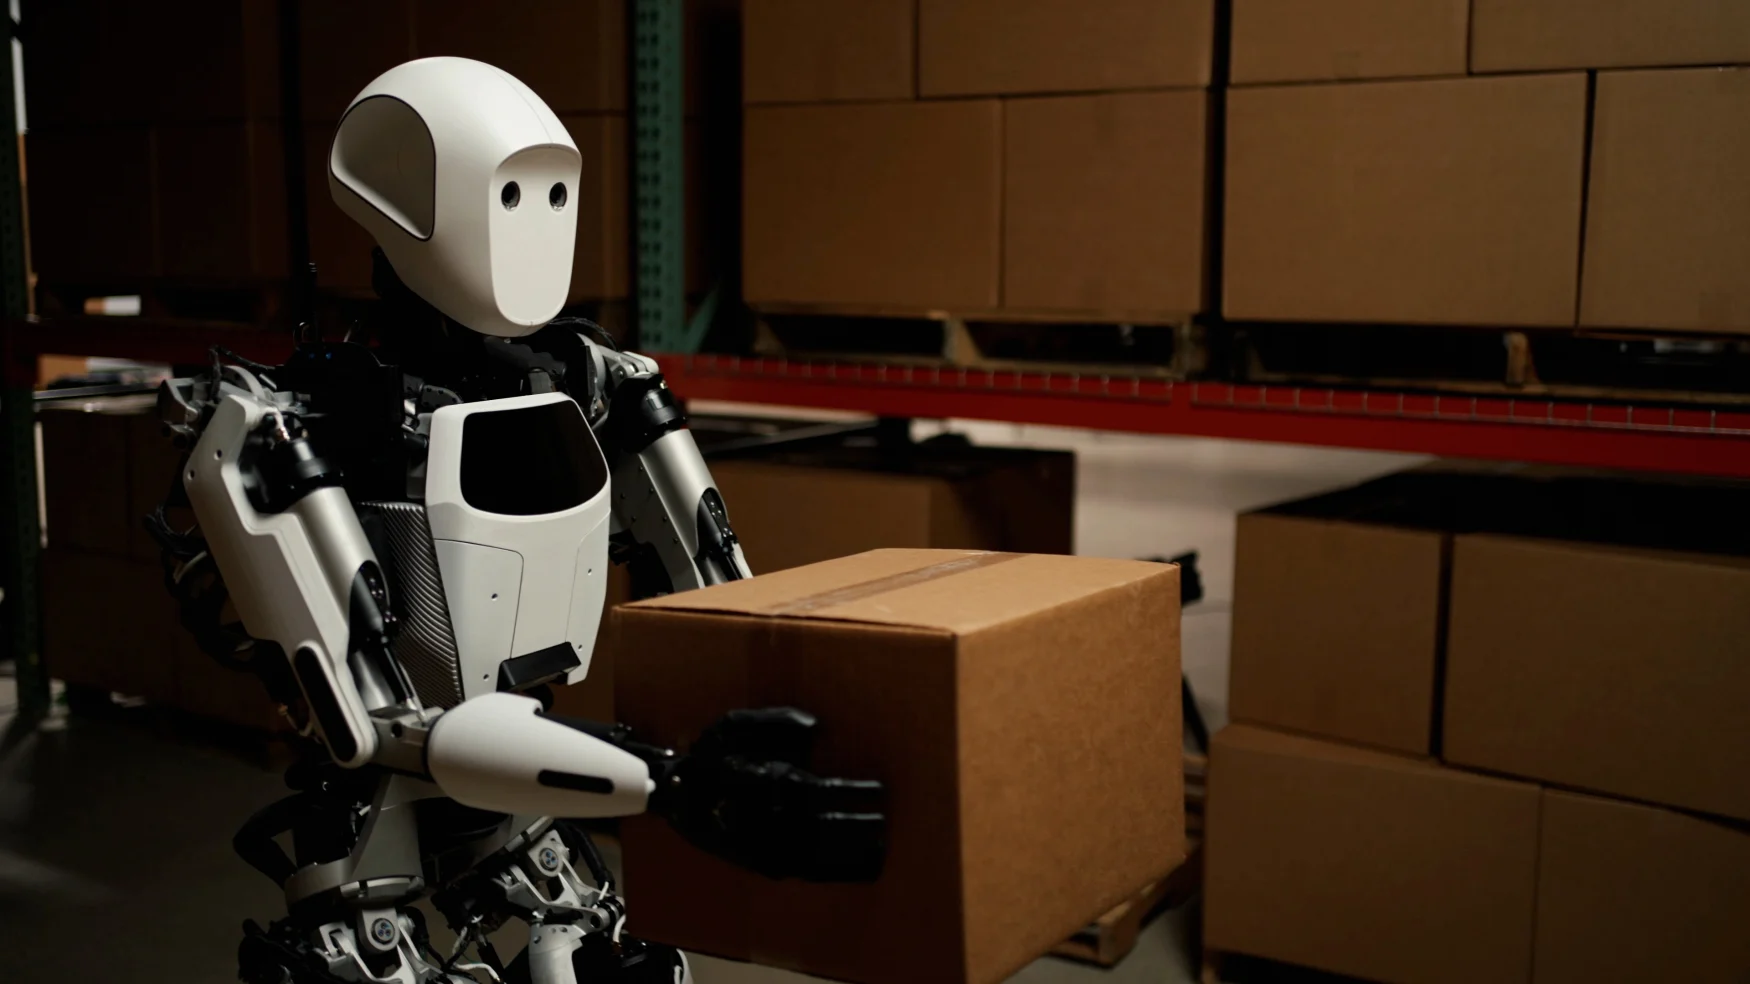 A white and black humanoid robot carries a standard brown box in a warehouse full of other brown boxes.